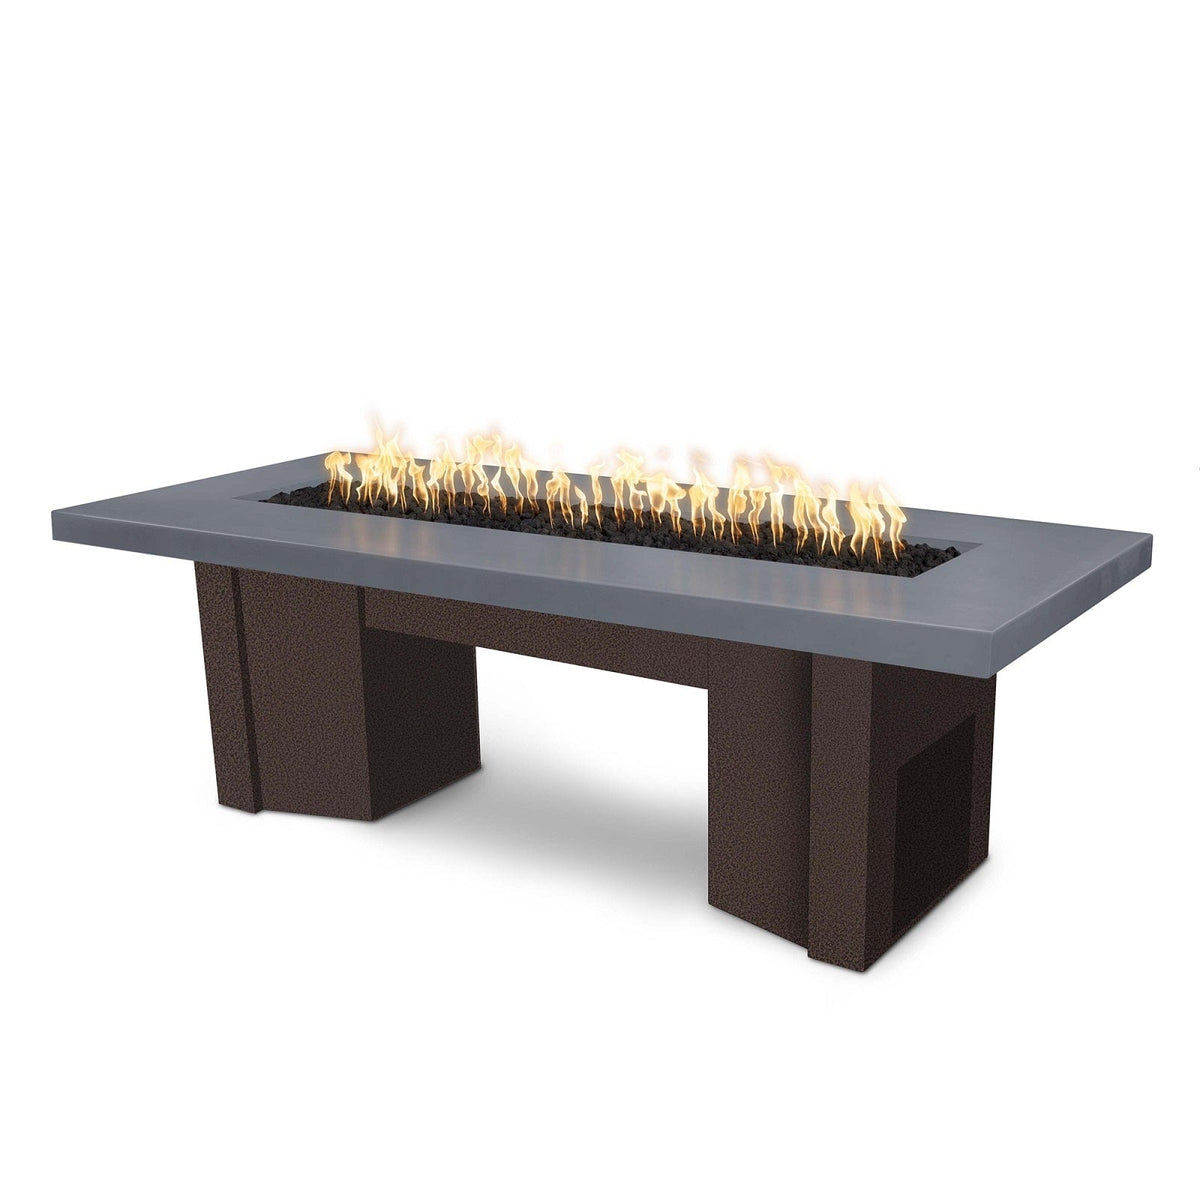 The Outdoor Plus Fire Features Gray (-GRY) / Copper Vein Powder Coated Steel (-CPV) The Outdoor Plus 78&quot; Alameda Fire Table Smooth Concrete in Liquid Propane - 110V Plug &amp; Play Electronic Ignition / OPT-ALMGFRC78EKIT-LP